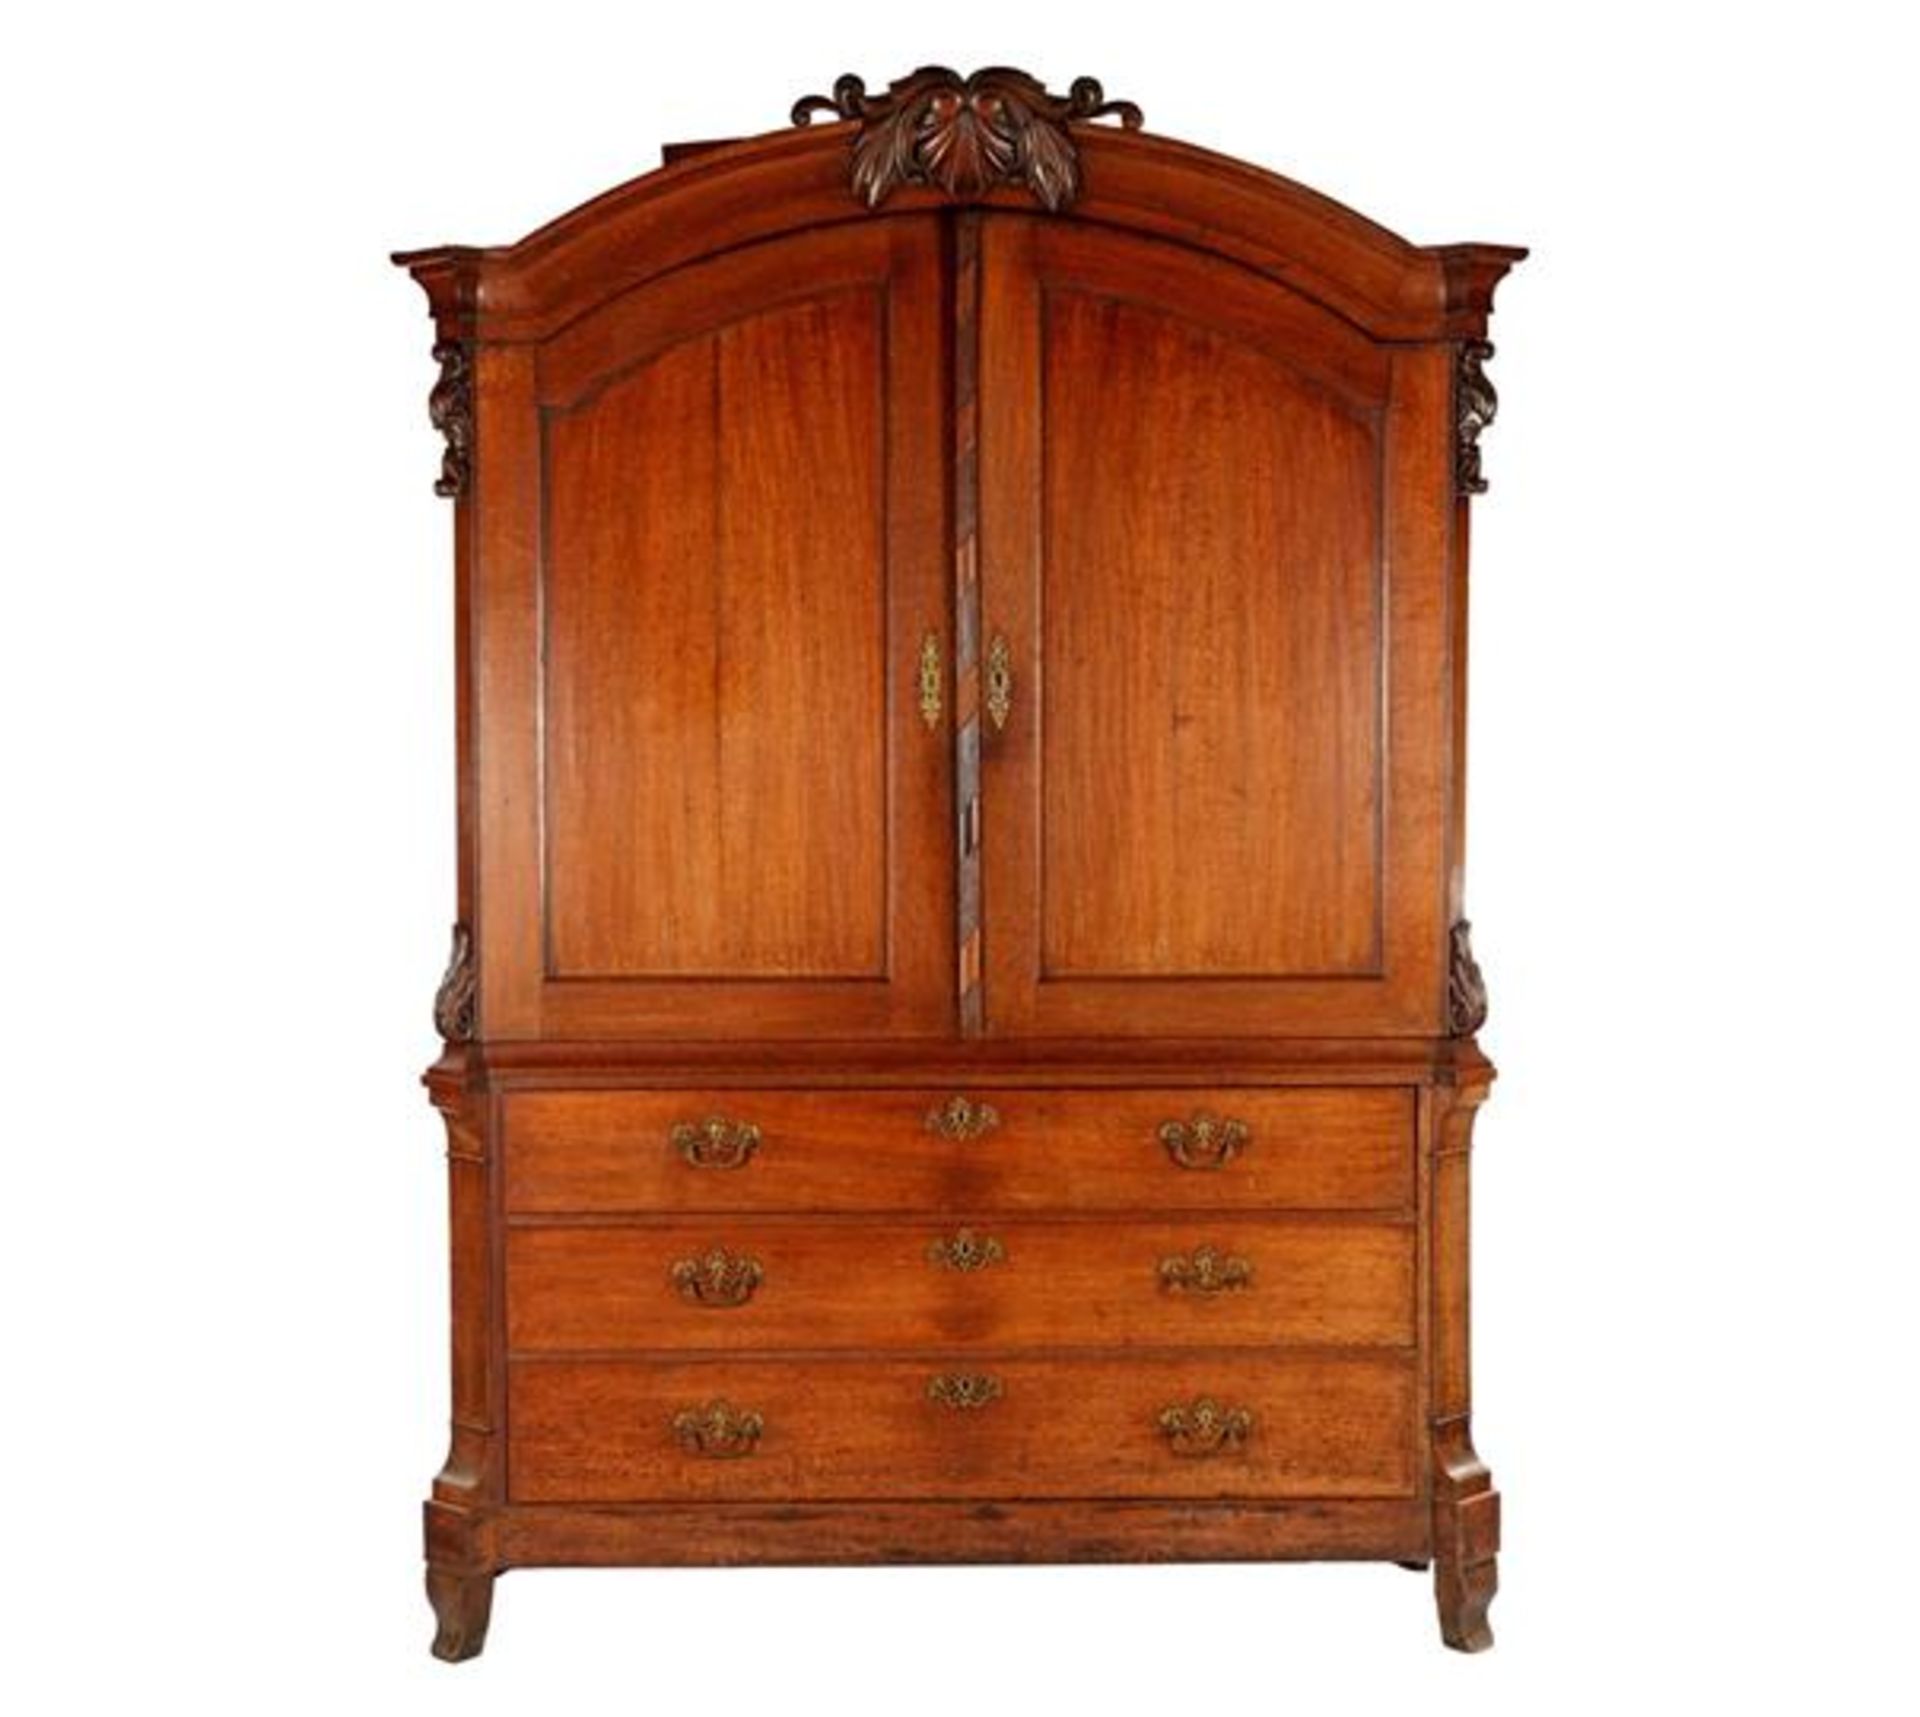 Oak cabinet with 2-door top cabinet and 3-drawers base cabinet, 18th century, 246 cm high, 173 cm